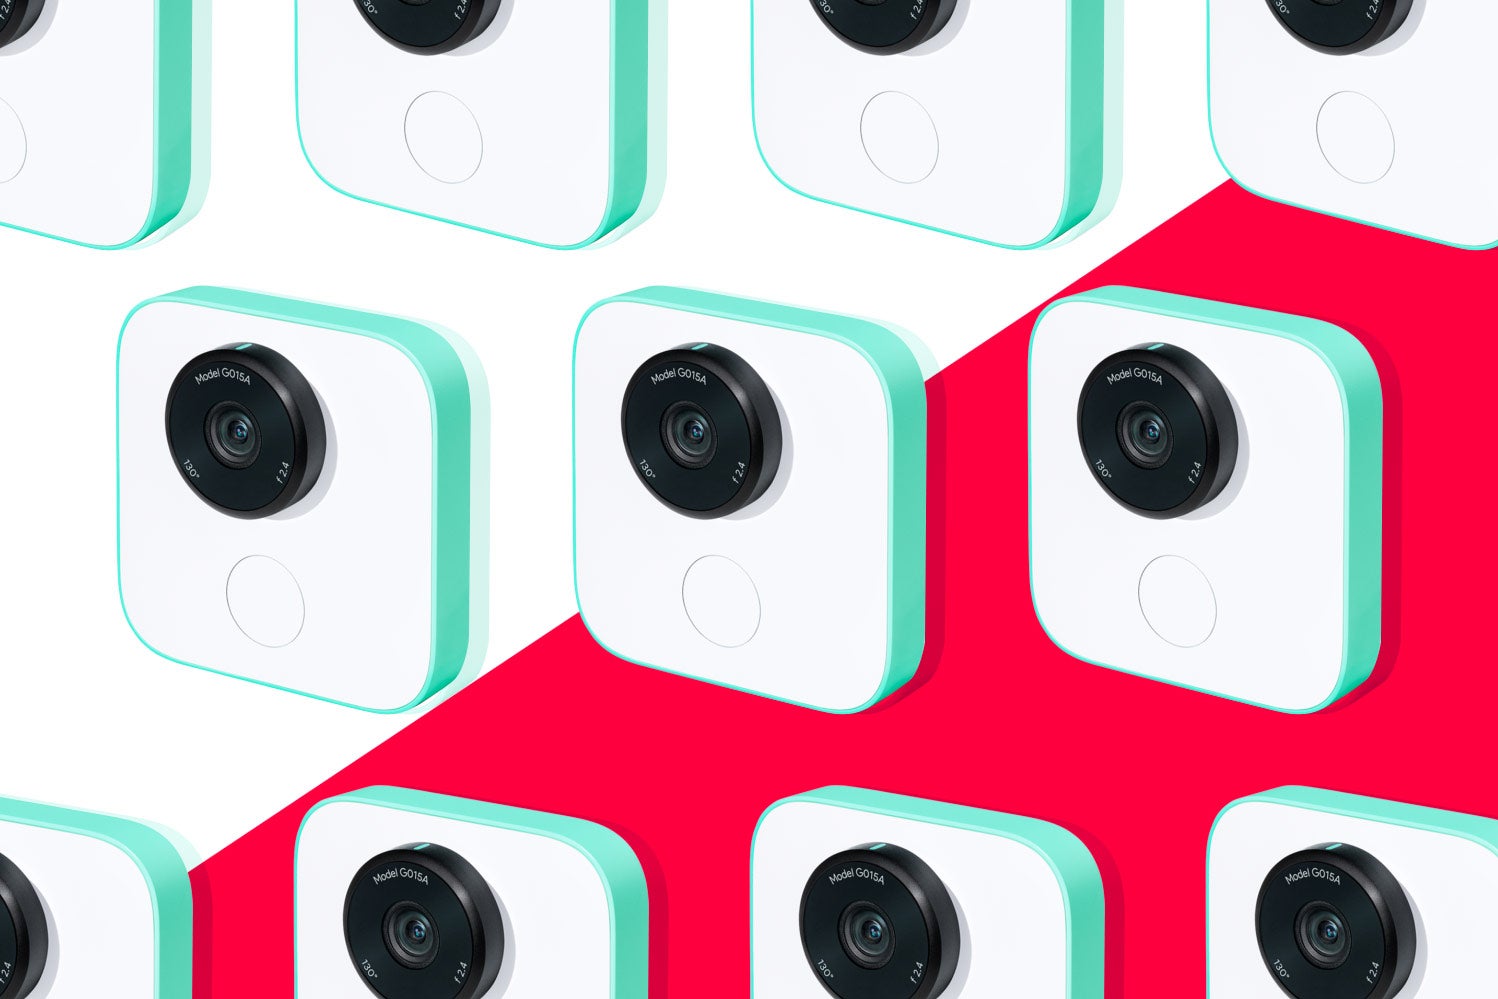 Photo illustration: cascading images of Google Clips against a red and white background.